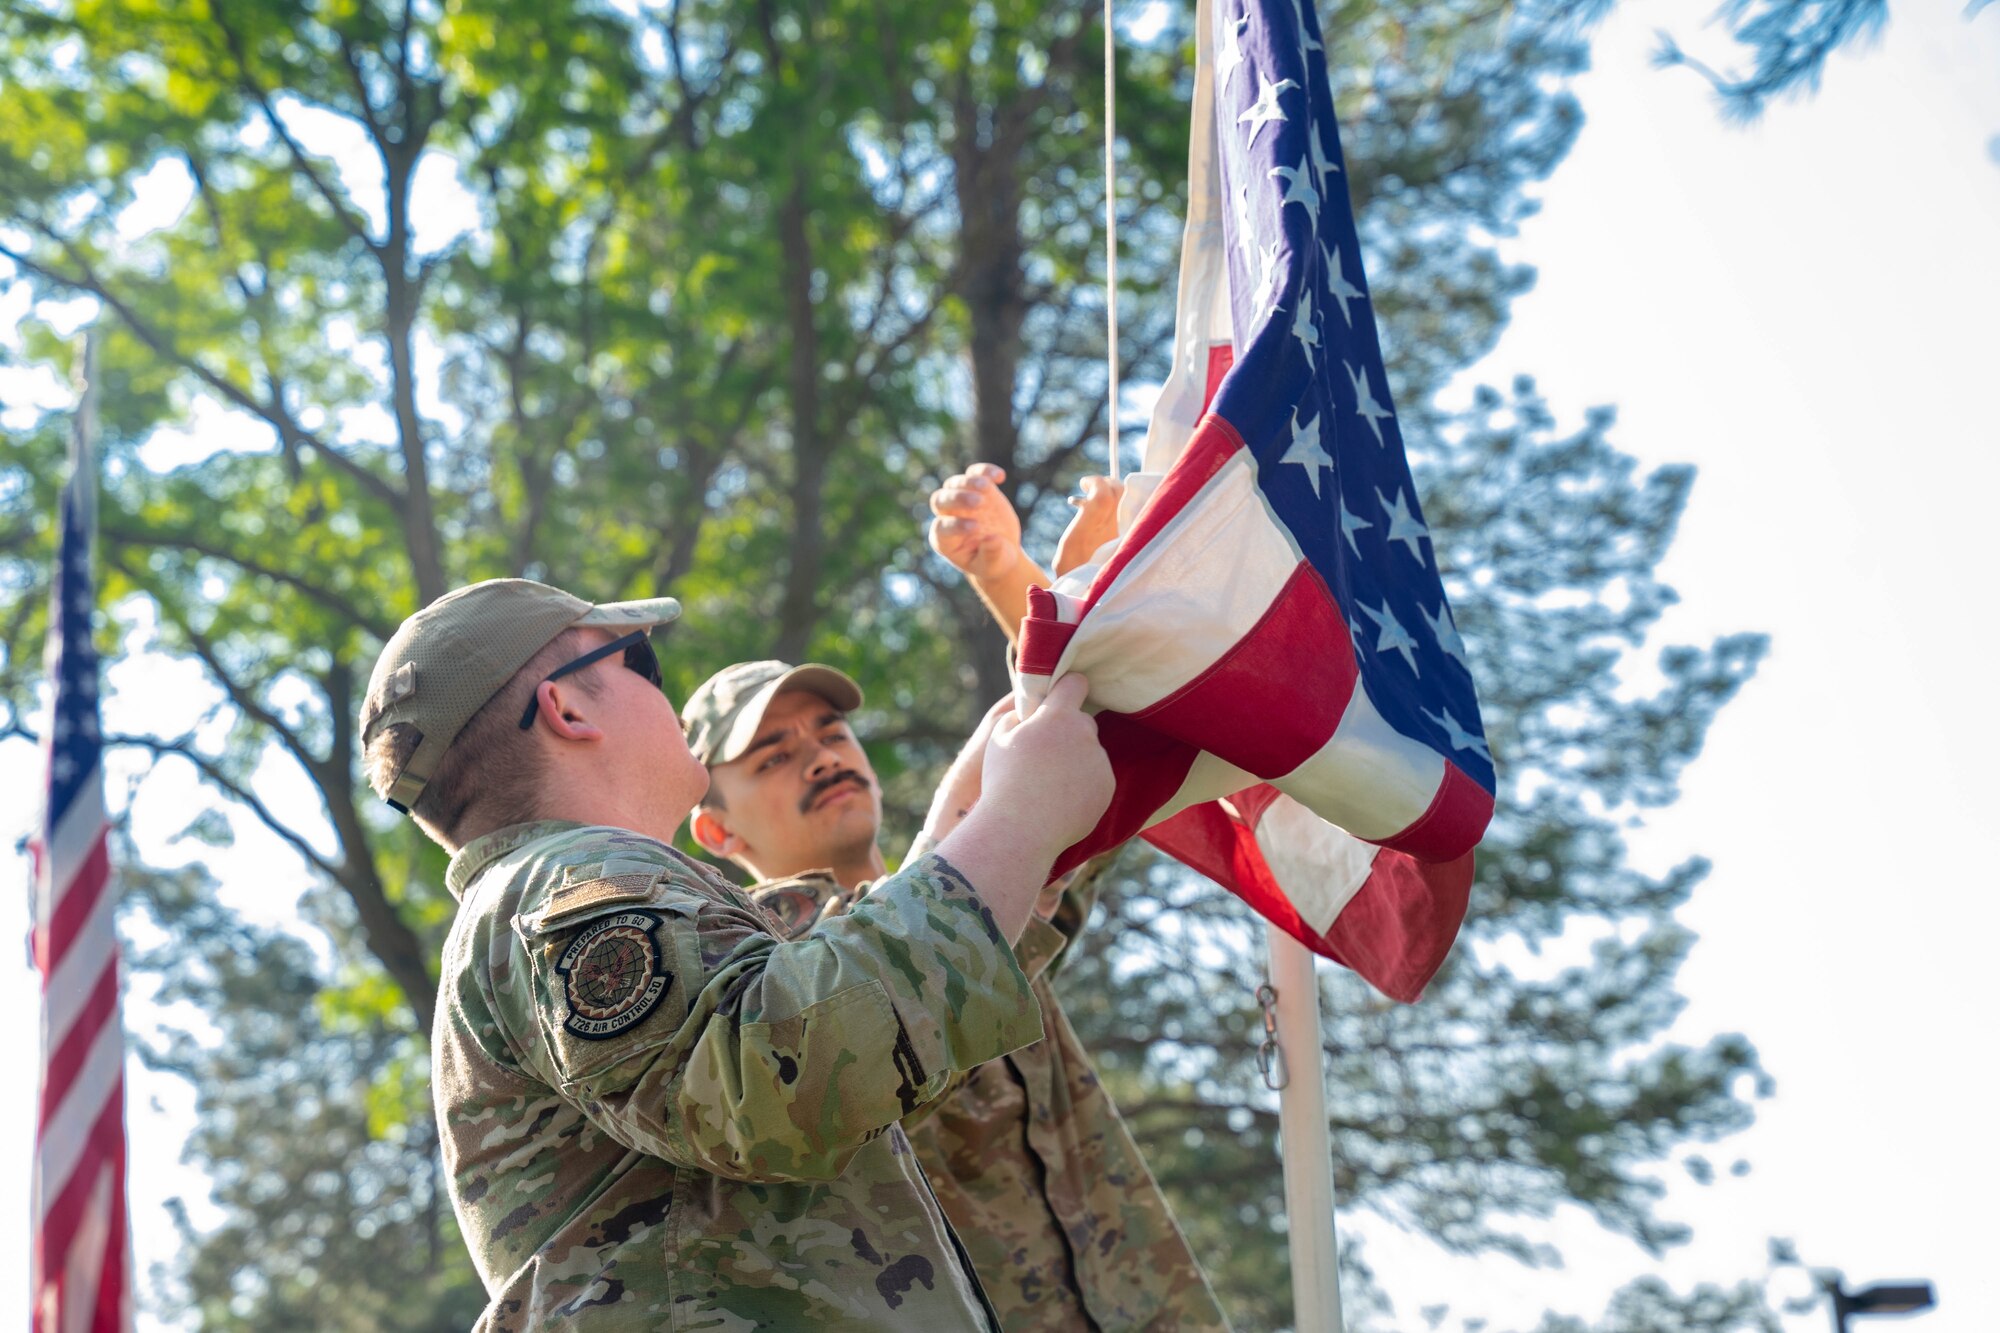 Senior Airman Chase Hanes, left, 726th Air Control Squadron, and Senior Airman Jonathon Vowels, 366th Security Forces Squadron, Mountain Home Air Force Base, hoist up the flag at the Idaho State Veterans home, Boise, Idaho, May 20, 2023. Airmen volunteered for a car show event at the veteran’s home, assisting senior veterans with voting on their favorite car. (U.S. Air National Guard photo by Senior Airman Natalie Filzen)